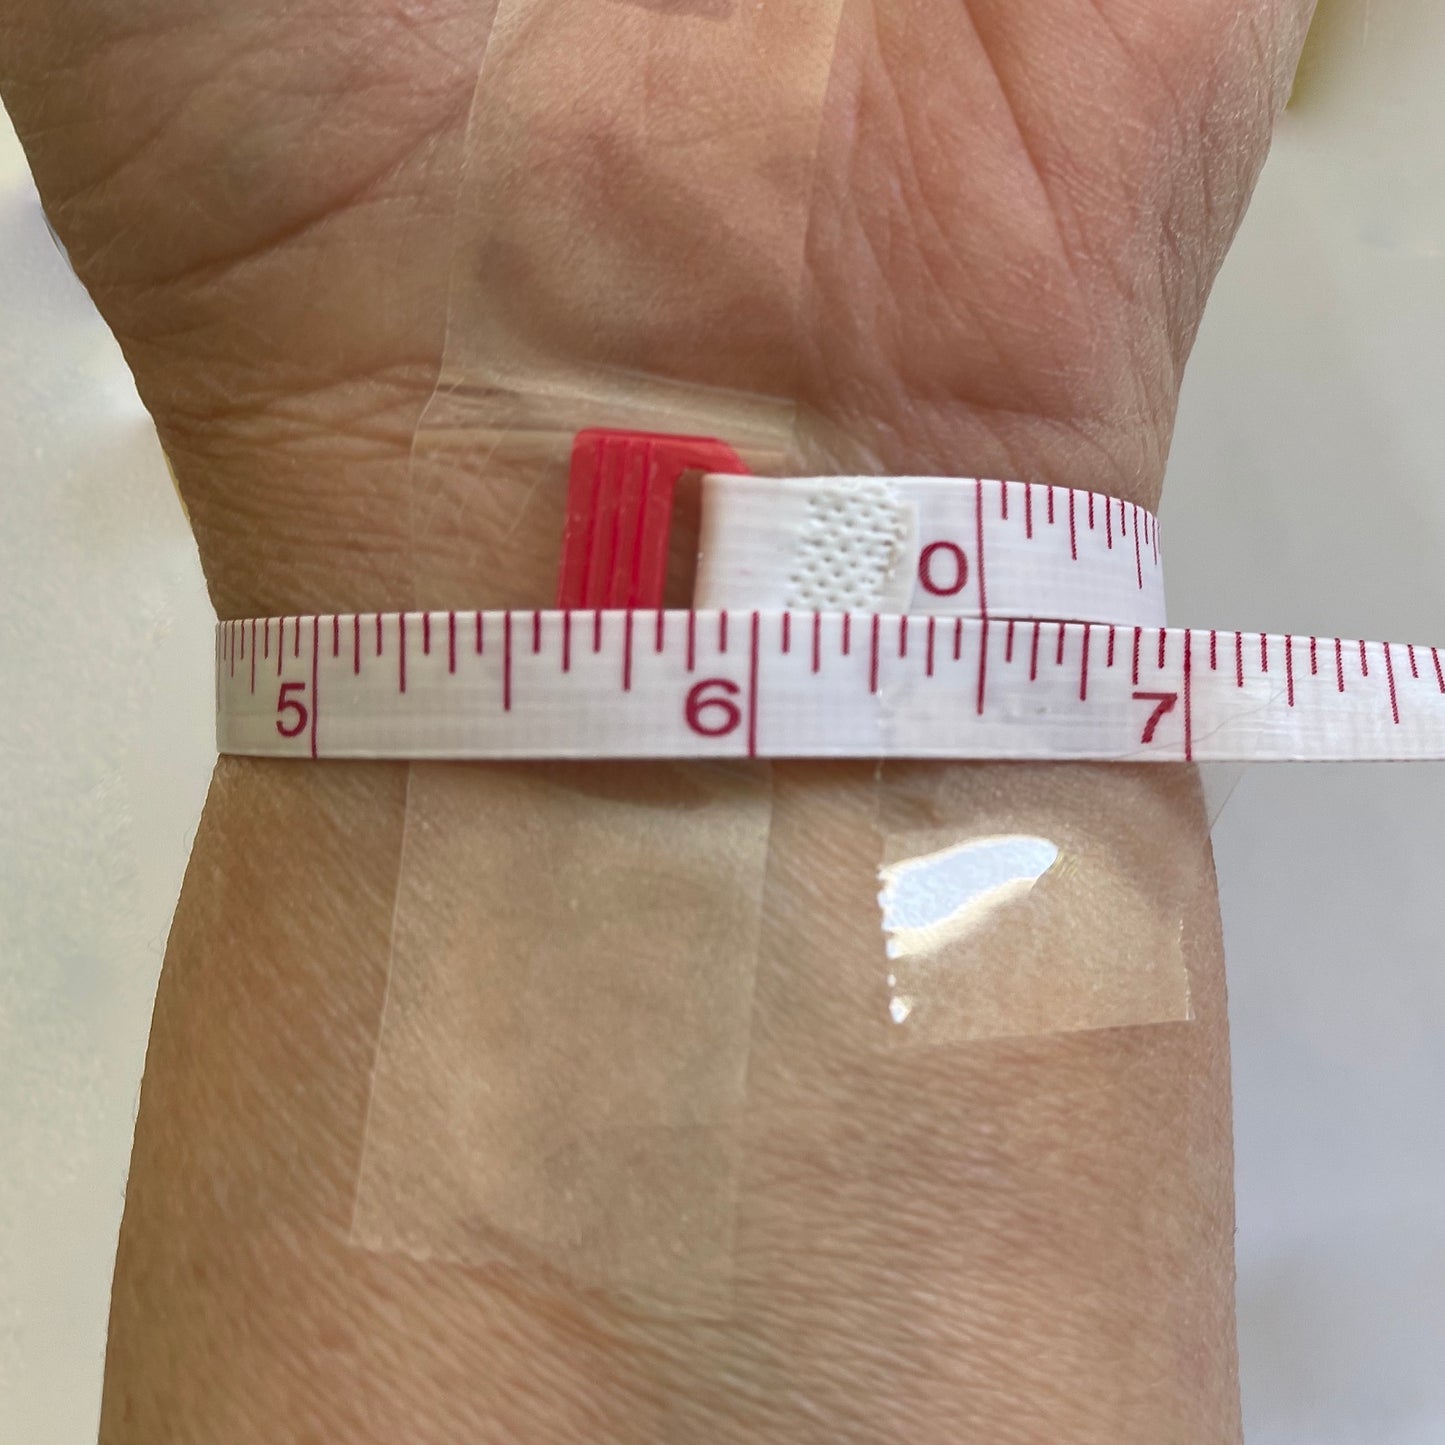 Designer Kimberly Arpaia sizes her wrist using a soft measuring tape. It reads 6.5 inches.